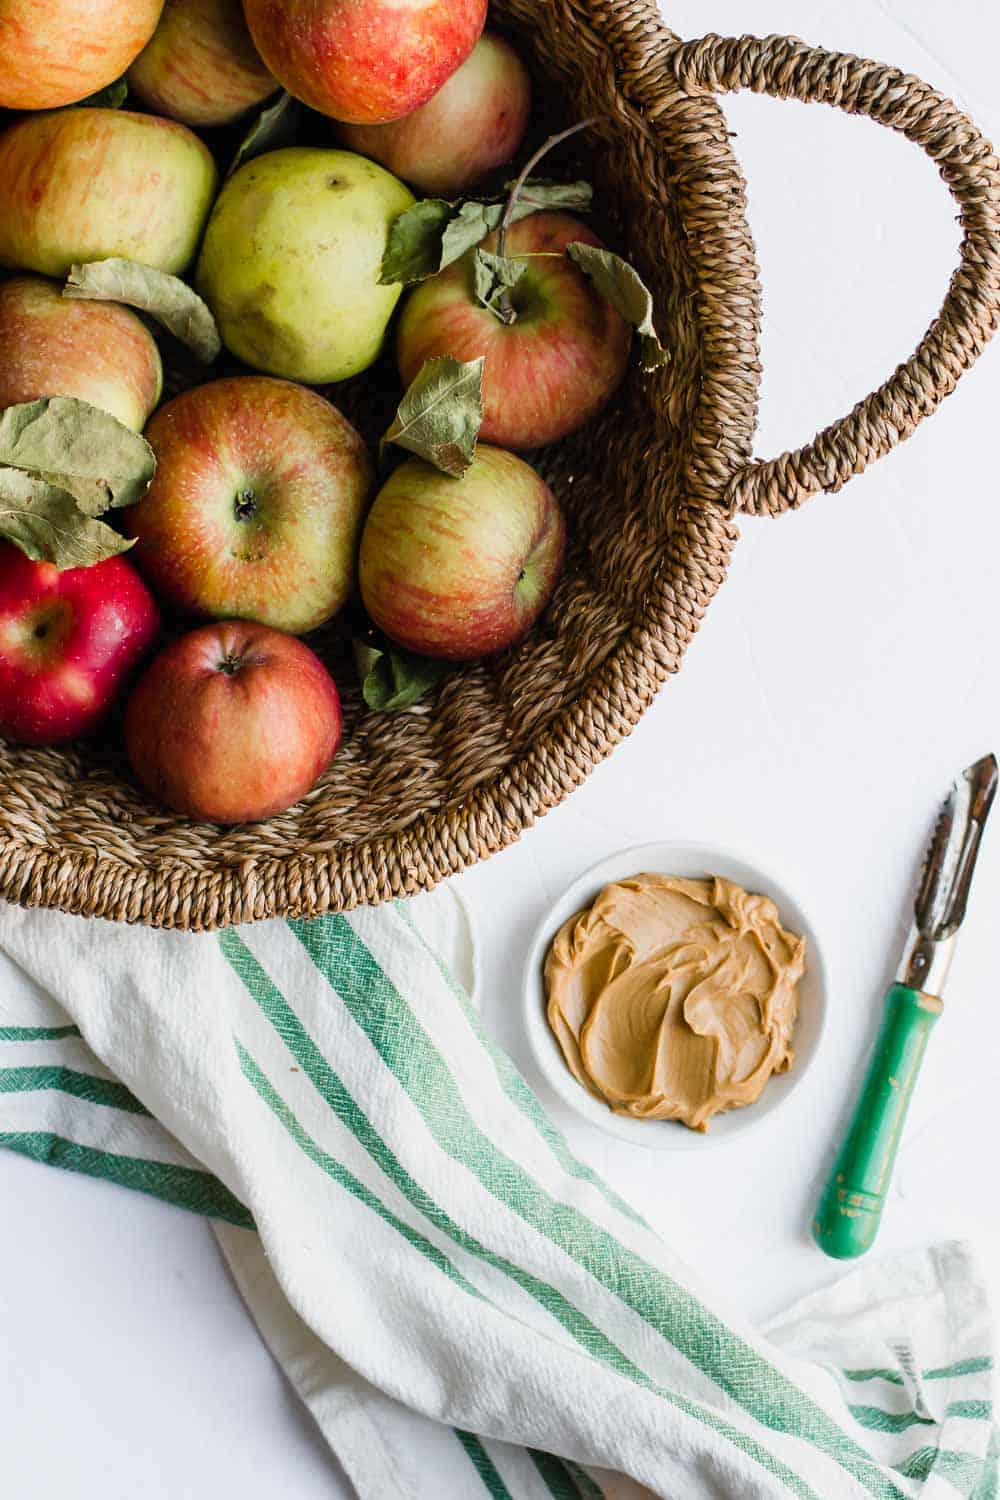 Make this apple and peanut butter sandwich as an easy and healthy snack. Naturally gluten-free and vegan, this can also be made nut-free. Whip this together in under 5 minutes for a snack the whole family will love. || The Butter Half #easysnacks #easysnackidea #healthysnacks #glutenfreesnacks #vegansnacks #quicksnacks #thebutterhalf